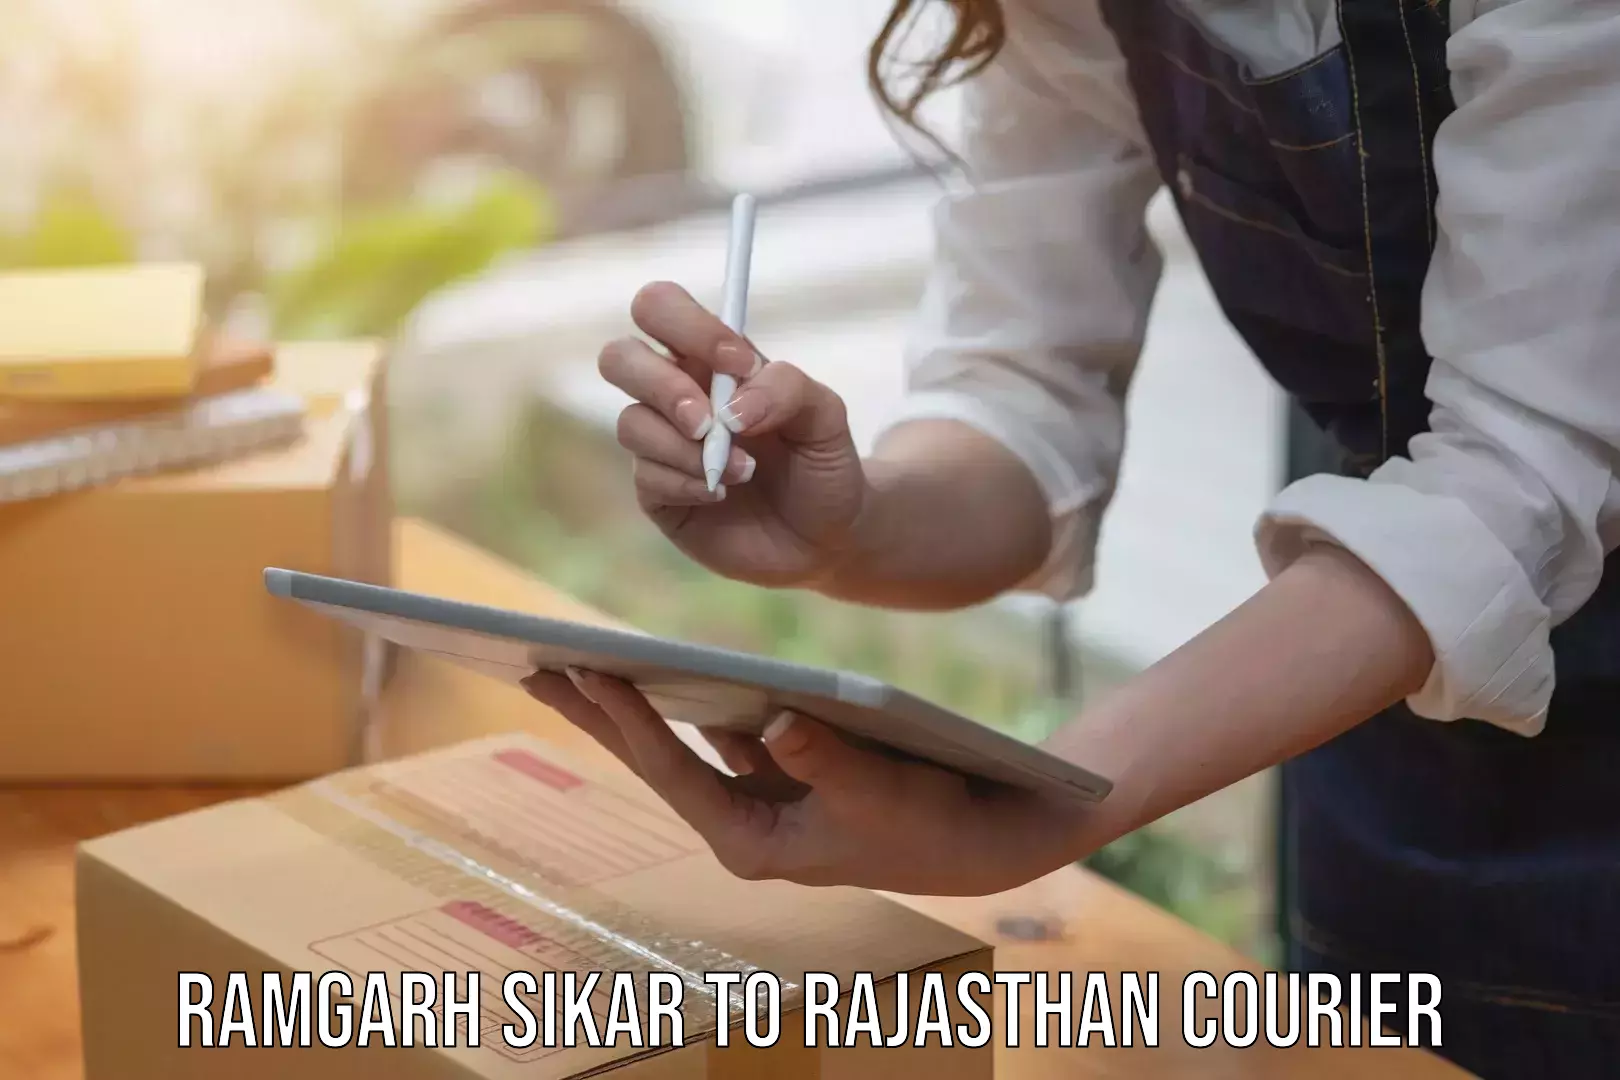 Multi-service courier options Ramgarh Sikar to Deeg